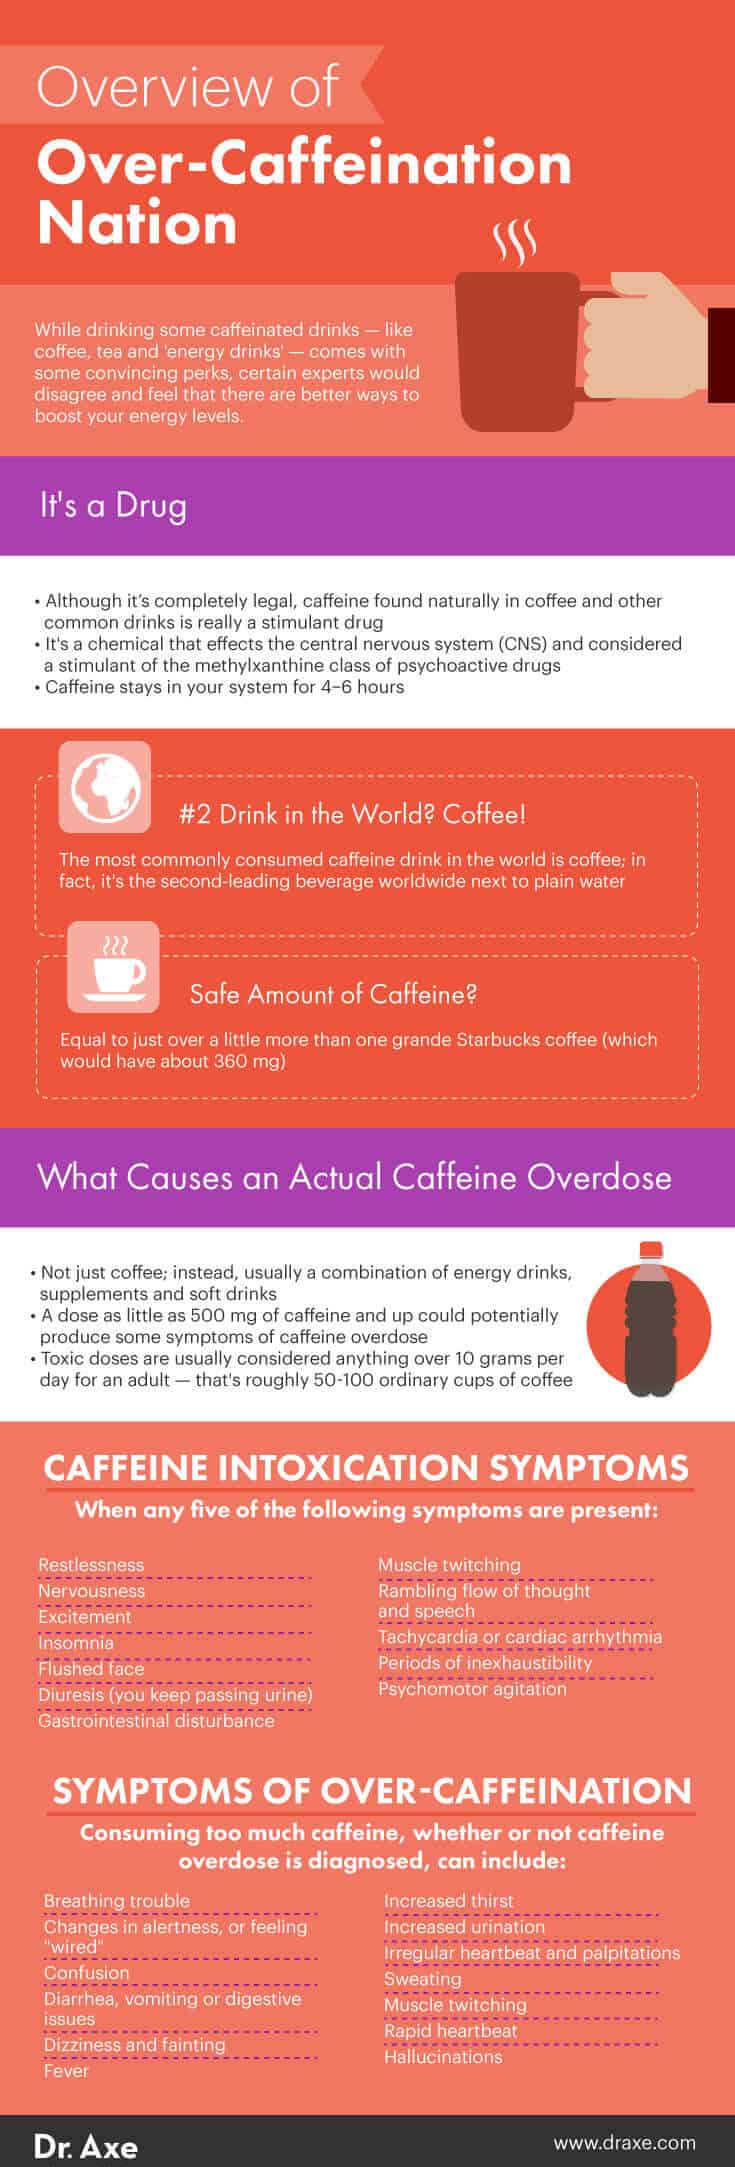 Can Caffeine Overdose Make Your Troponin Levels High?